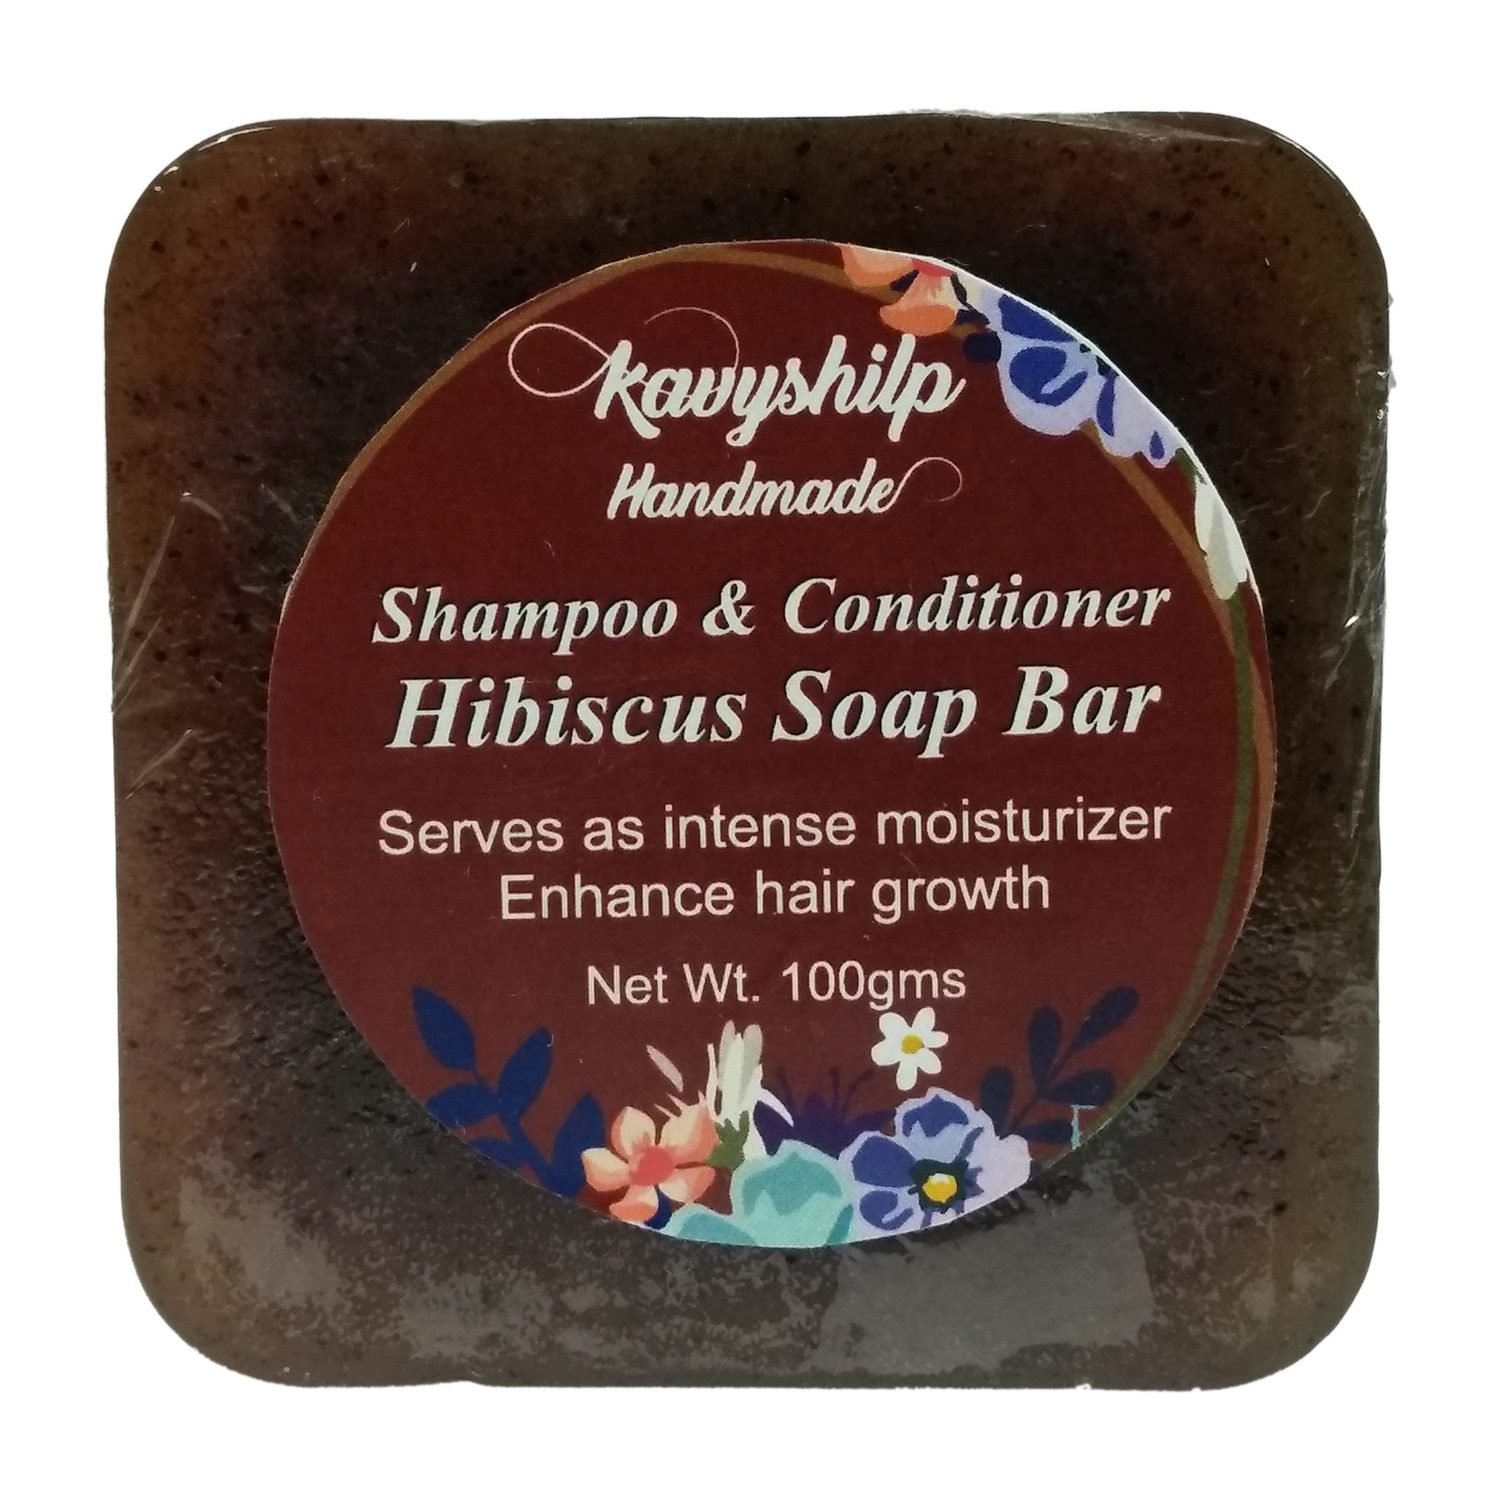 Hibiscus Shampoo Conditioner Bar for Women, Men, Girls, and Boys